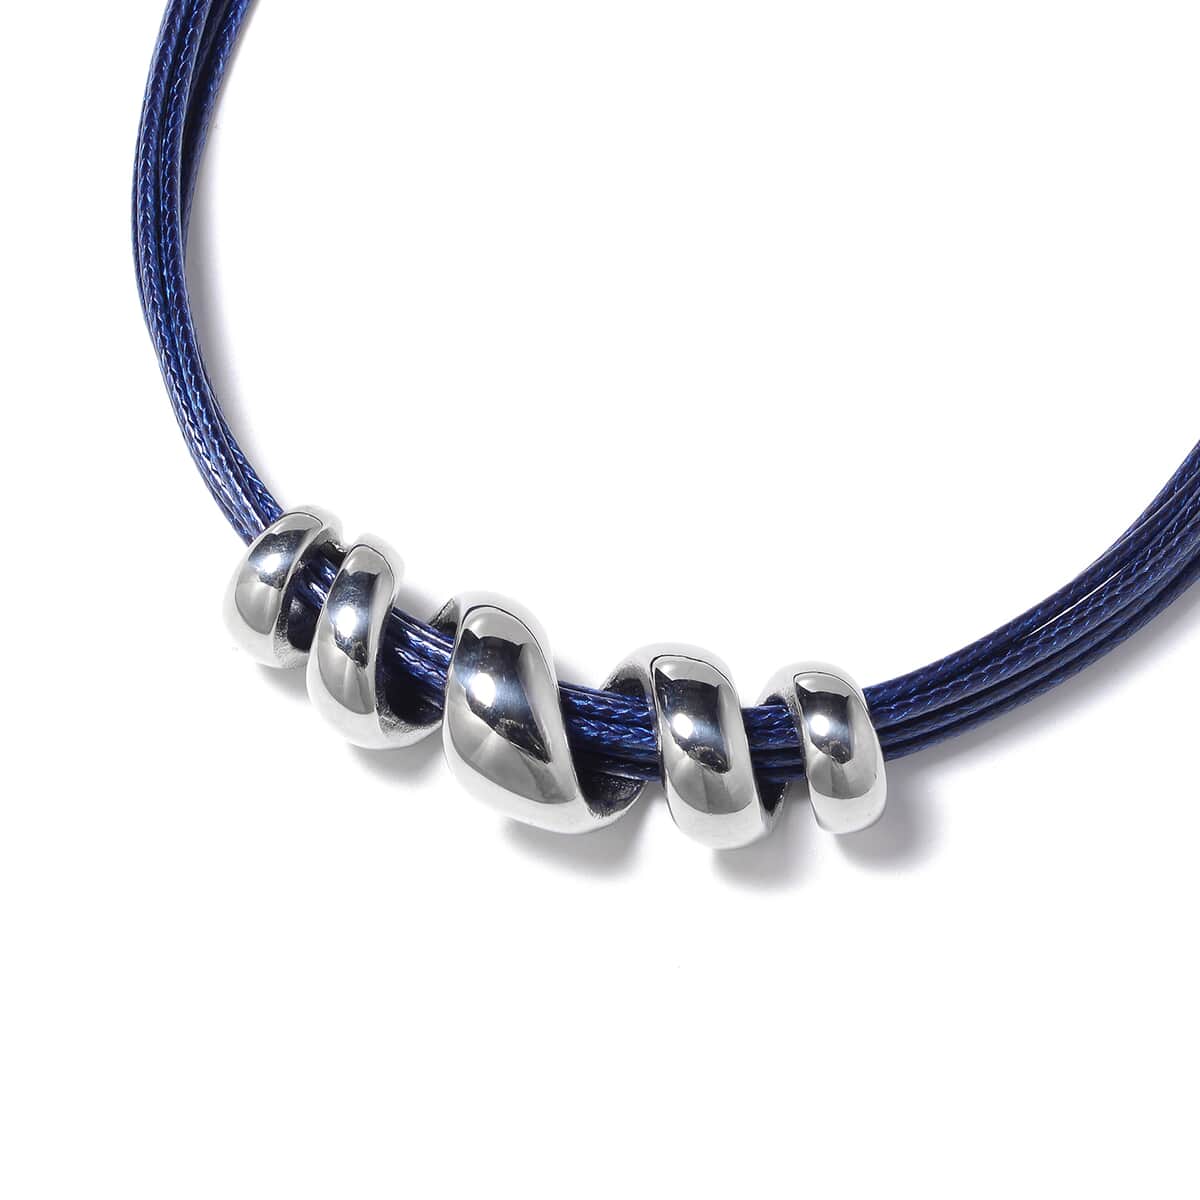 Blue Faux Leather Cord Twist Bracelet (7 in) and Necklace 16.00 Inches in Stainless Steel image number 3